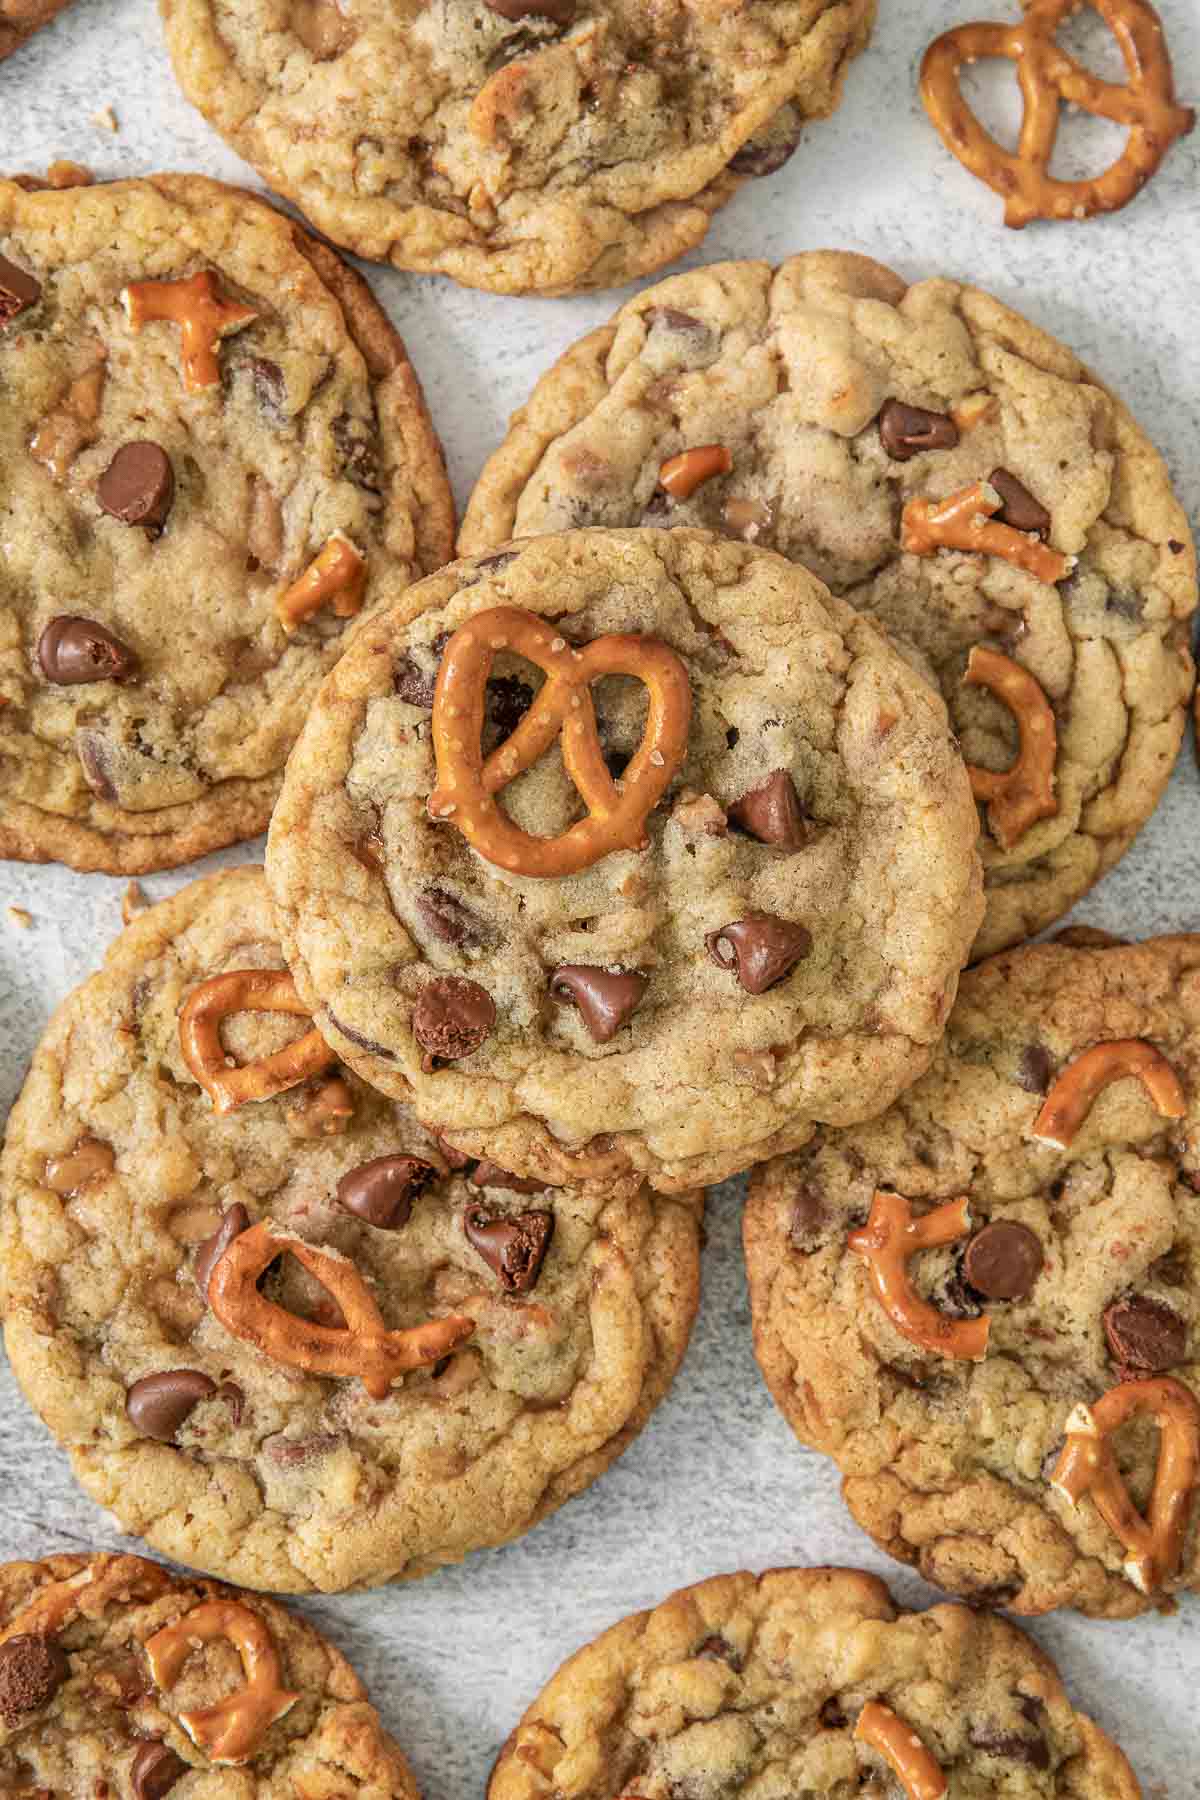 Multiple Kitchen Sink Cookies on a grey background surrounded by pretzels.